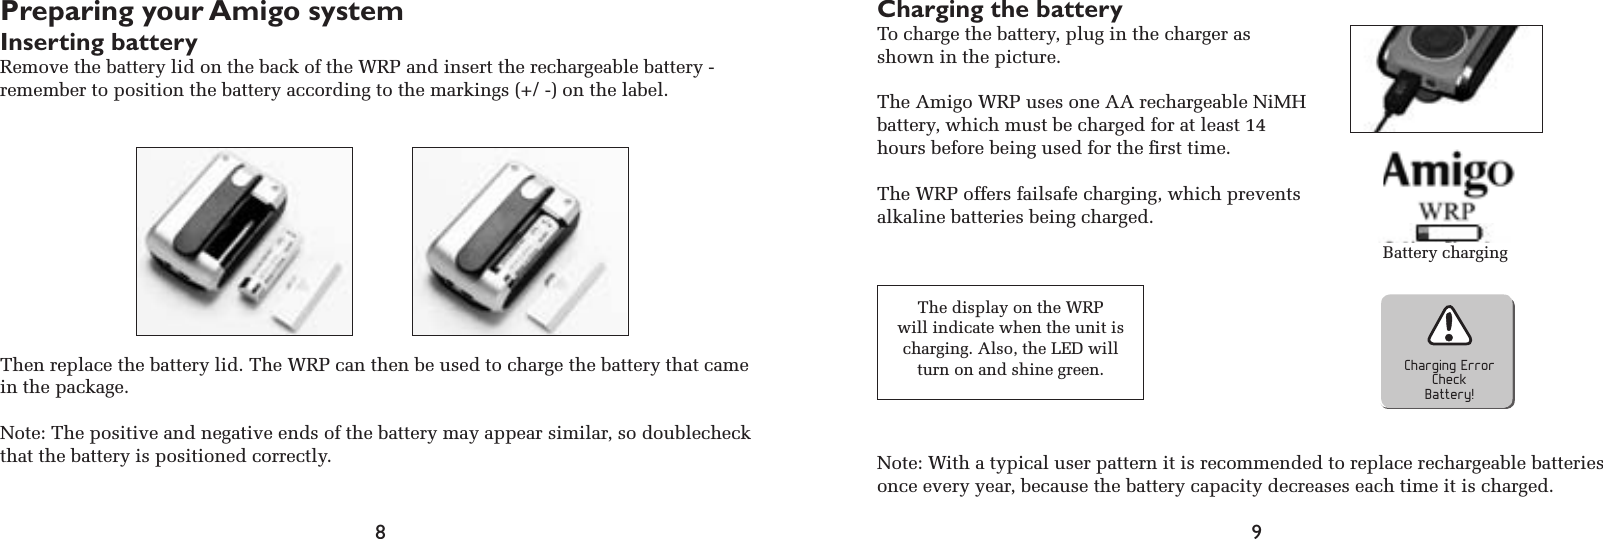 8 9Preparing your Amigo systemInserting batteryRemove the battery lid on the back of the WRP and insert the rechargeable battery -  remember to position the battery according to the markings (+/ -) on the label.Then replace the battery lid. The WRP can then be used to charge the battery that came in the package.Note: The positive and negative ends of the battery may appear similar, so doublecheck that the battery is positioned correctly.Charging the batteryTo charge the battery, plug in the charger as shown in the picture.The Amigo WRP uses one AA rechargeable NiMH battery, which must be charged for at least 14 hours before being used for the ﬁrst time.The WRP offers failsafe charging, which prevents alkaline batteries being charged.Charging ErrorCheckBattery!The display on the WRPwill indicate when the unit is charging. Also, the LED will turn on and shine green. Note: With a typical user pattern it is recommended to replace rechargeable batteries once every year, because the battery capacity decreases each time it is charged.Battery charging